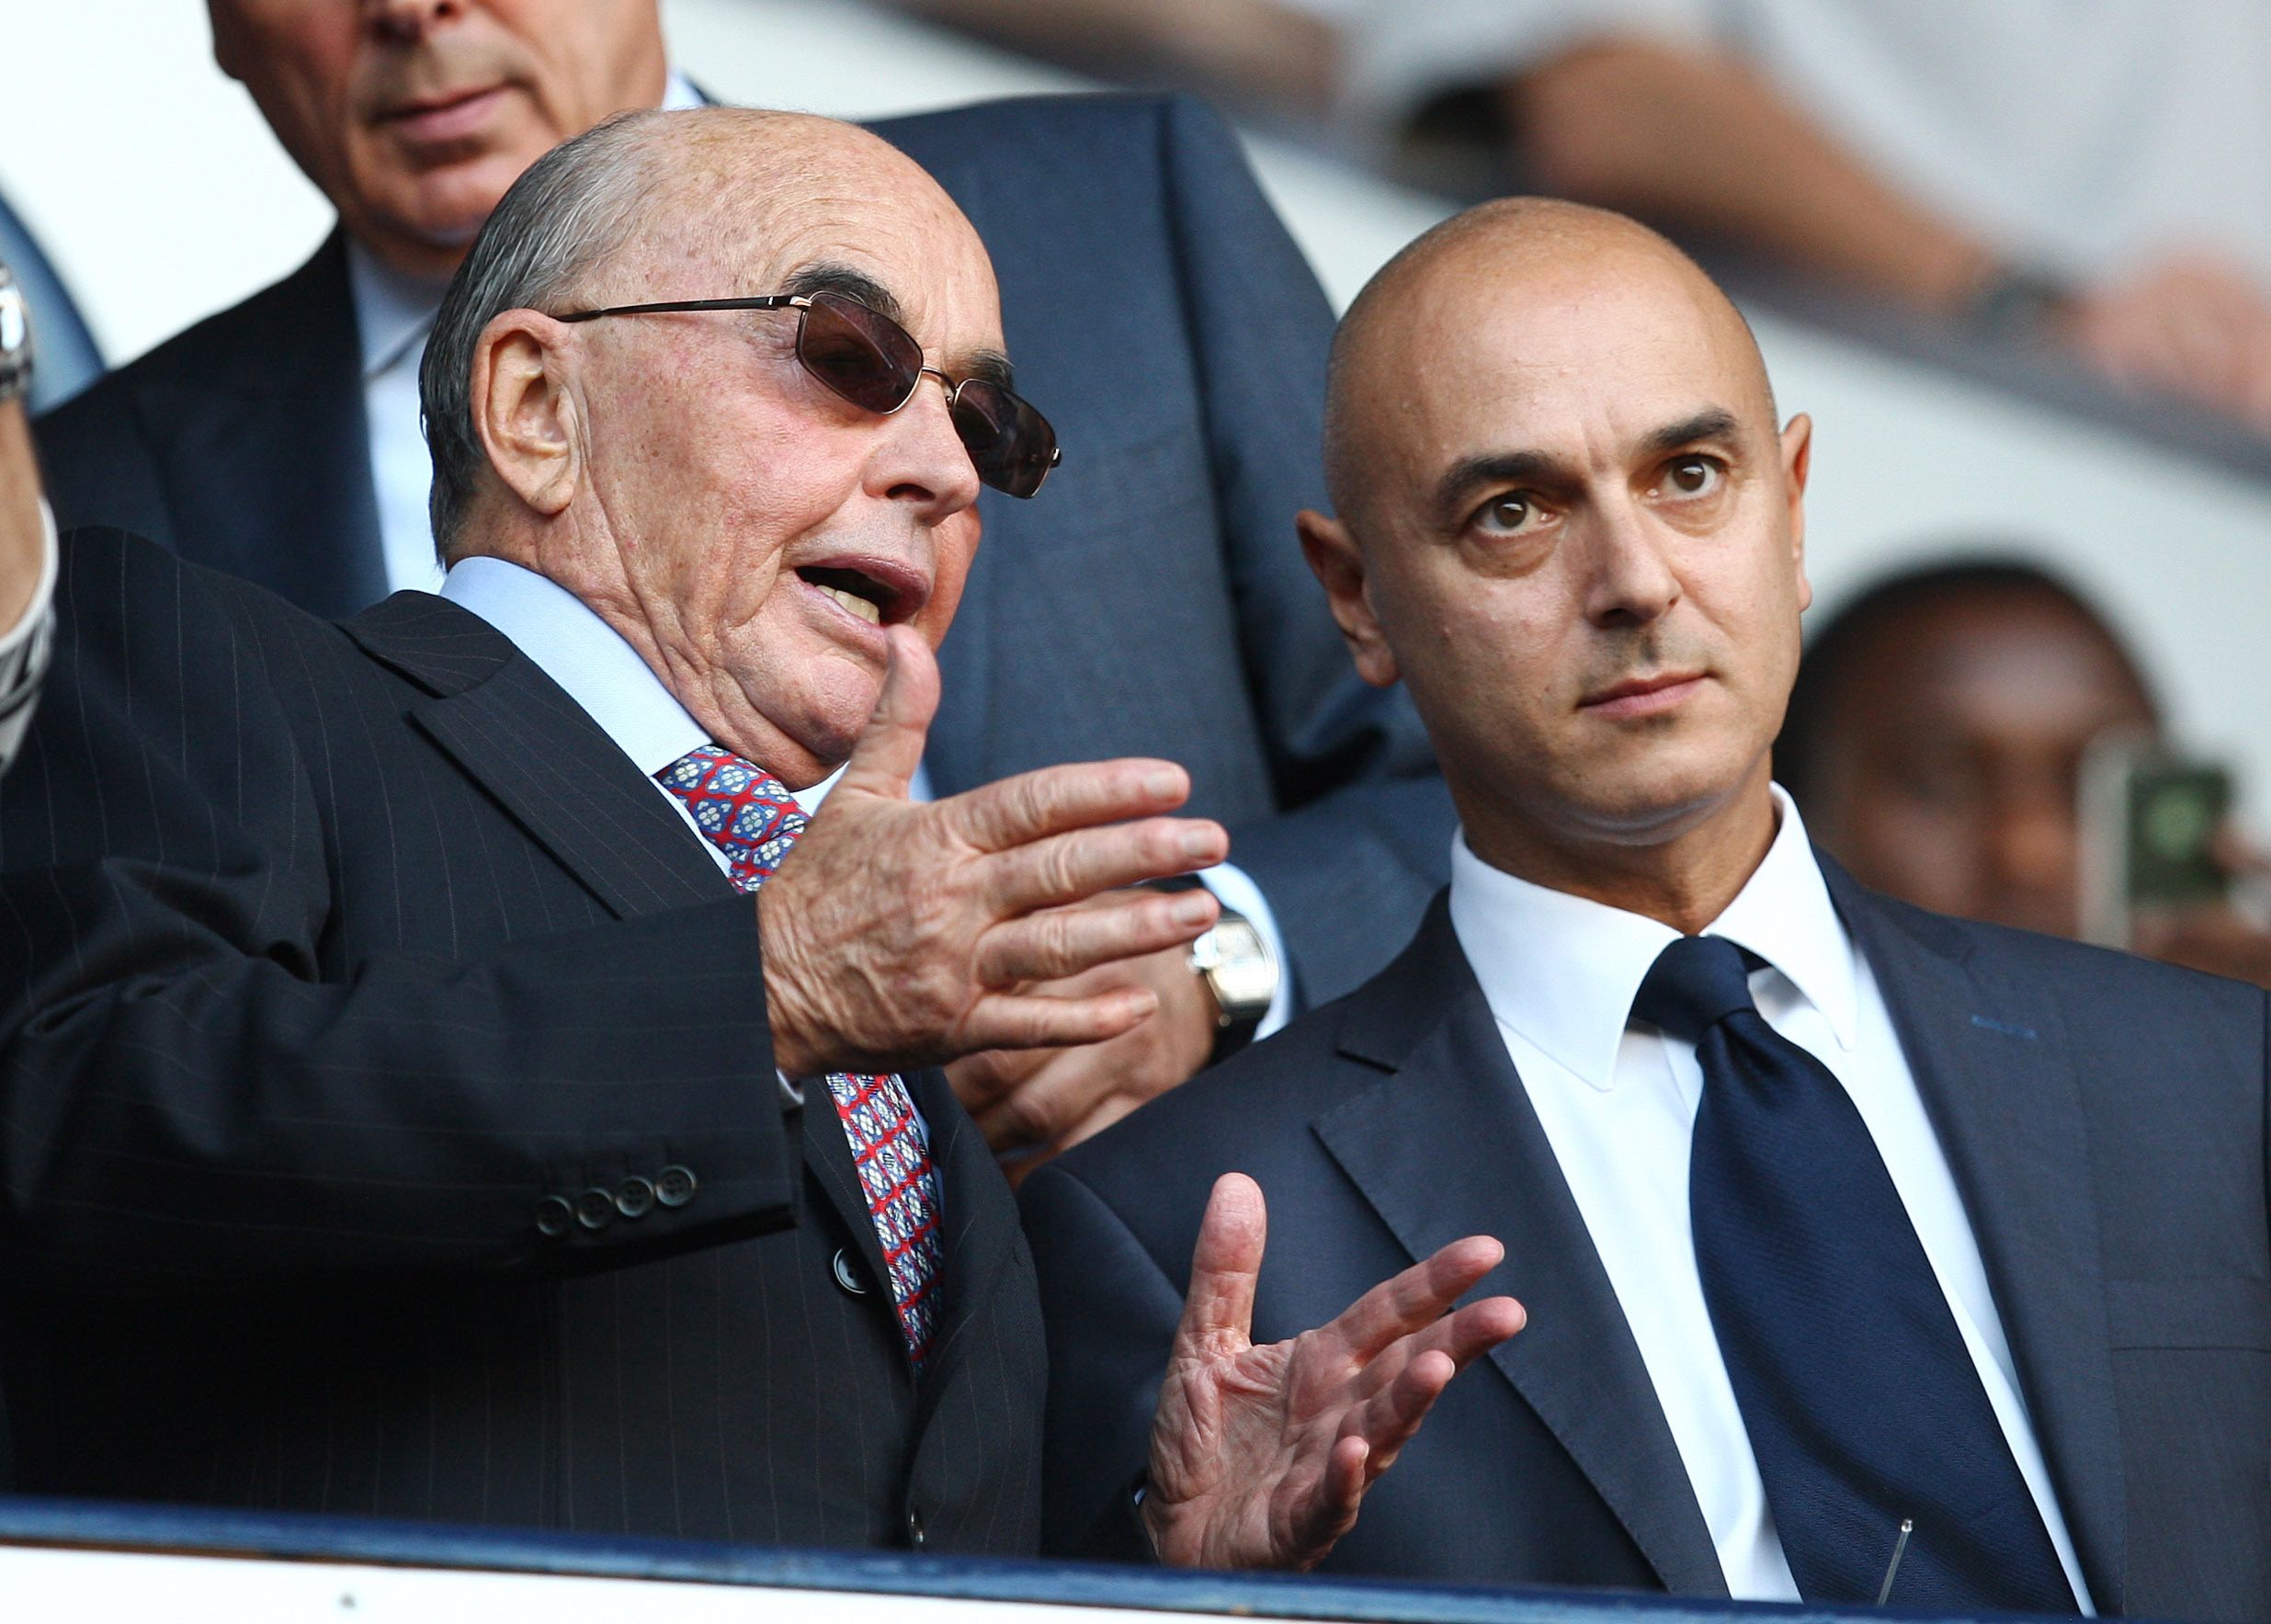 Football - Tottenham Hotspur v Arsenal Barclays Premier League  - White Hart Lane - 2/10/11 
ENIC International Limited Owner Joe Lewis (L) and Tottenham Chairman Daniel Levy in the stands 
Mandatory Credit: Action Images / Paul Childs 
Livepic 
EDITORIAL USE ONLY. No use with unauthorized audio, video, data, fixture lists, club/league logos or 